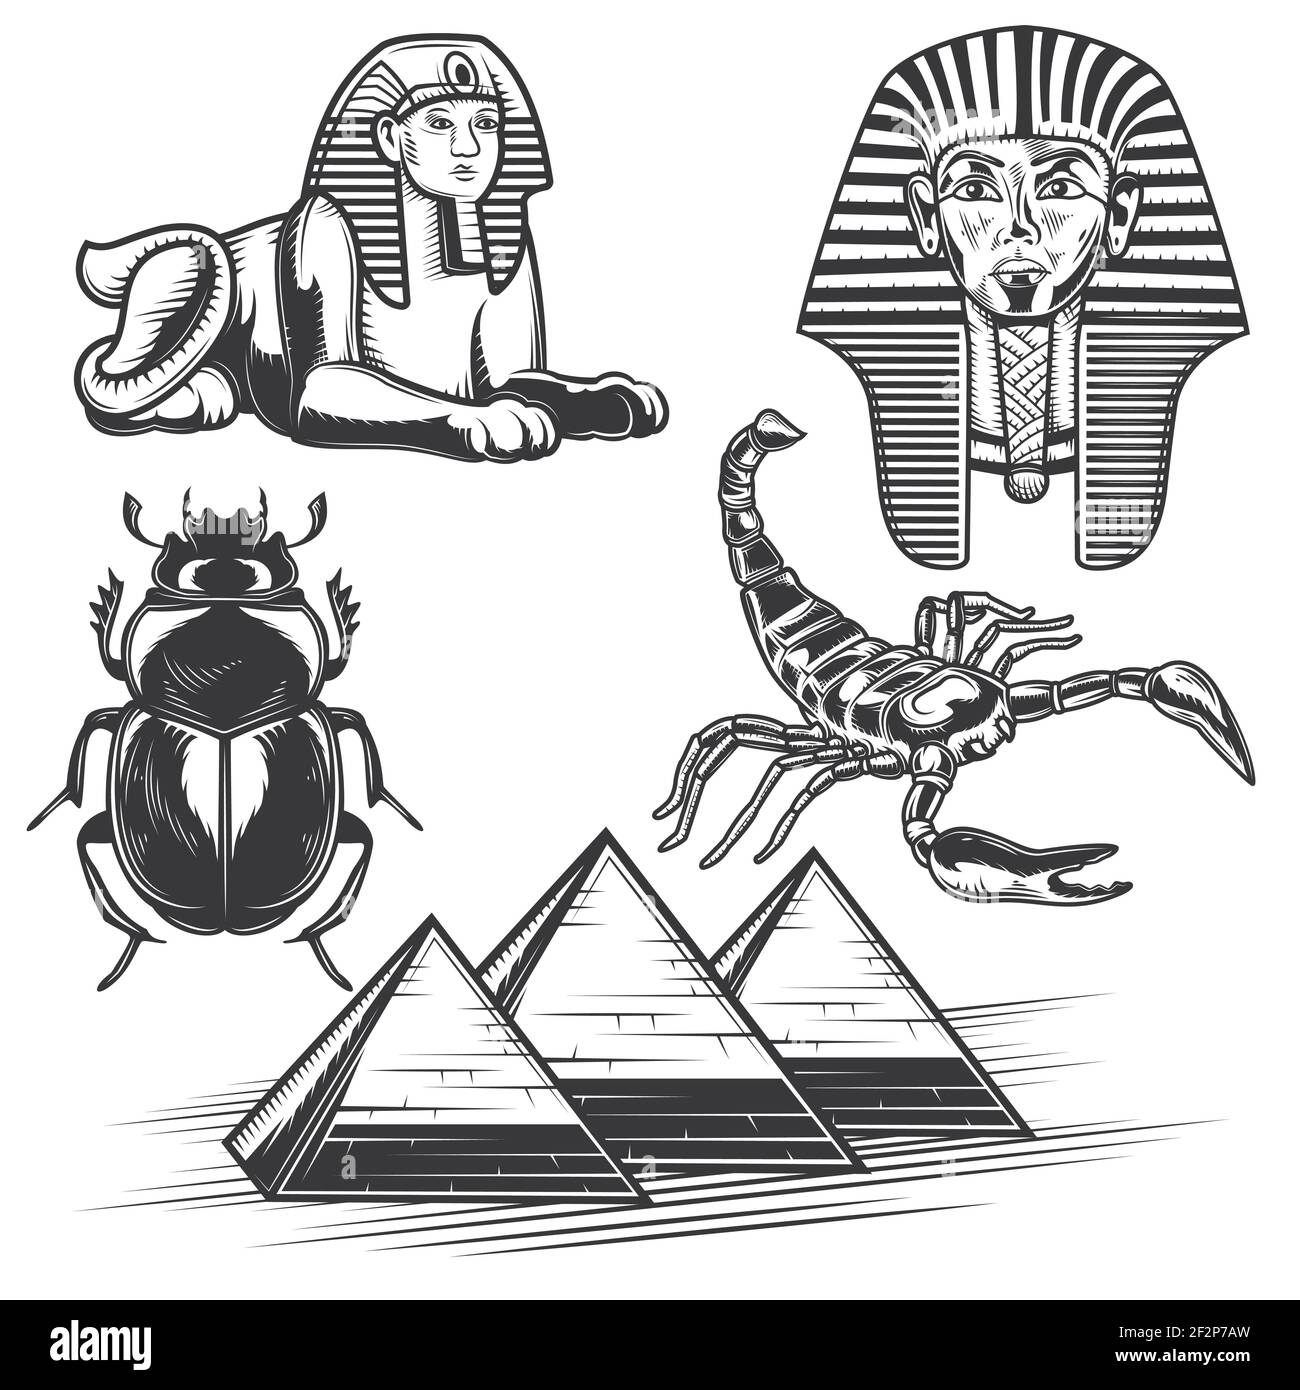 Set of egyptian elements (scorpion, Pharaoh, pyramids etc.) for creating your own badges, logos, labels, posters etc. Isolated on white. Stock Vector